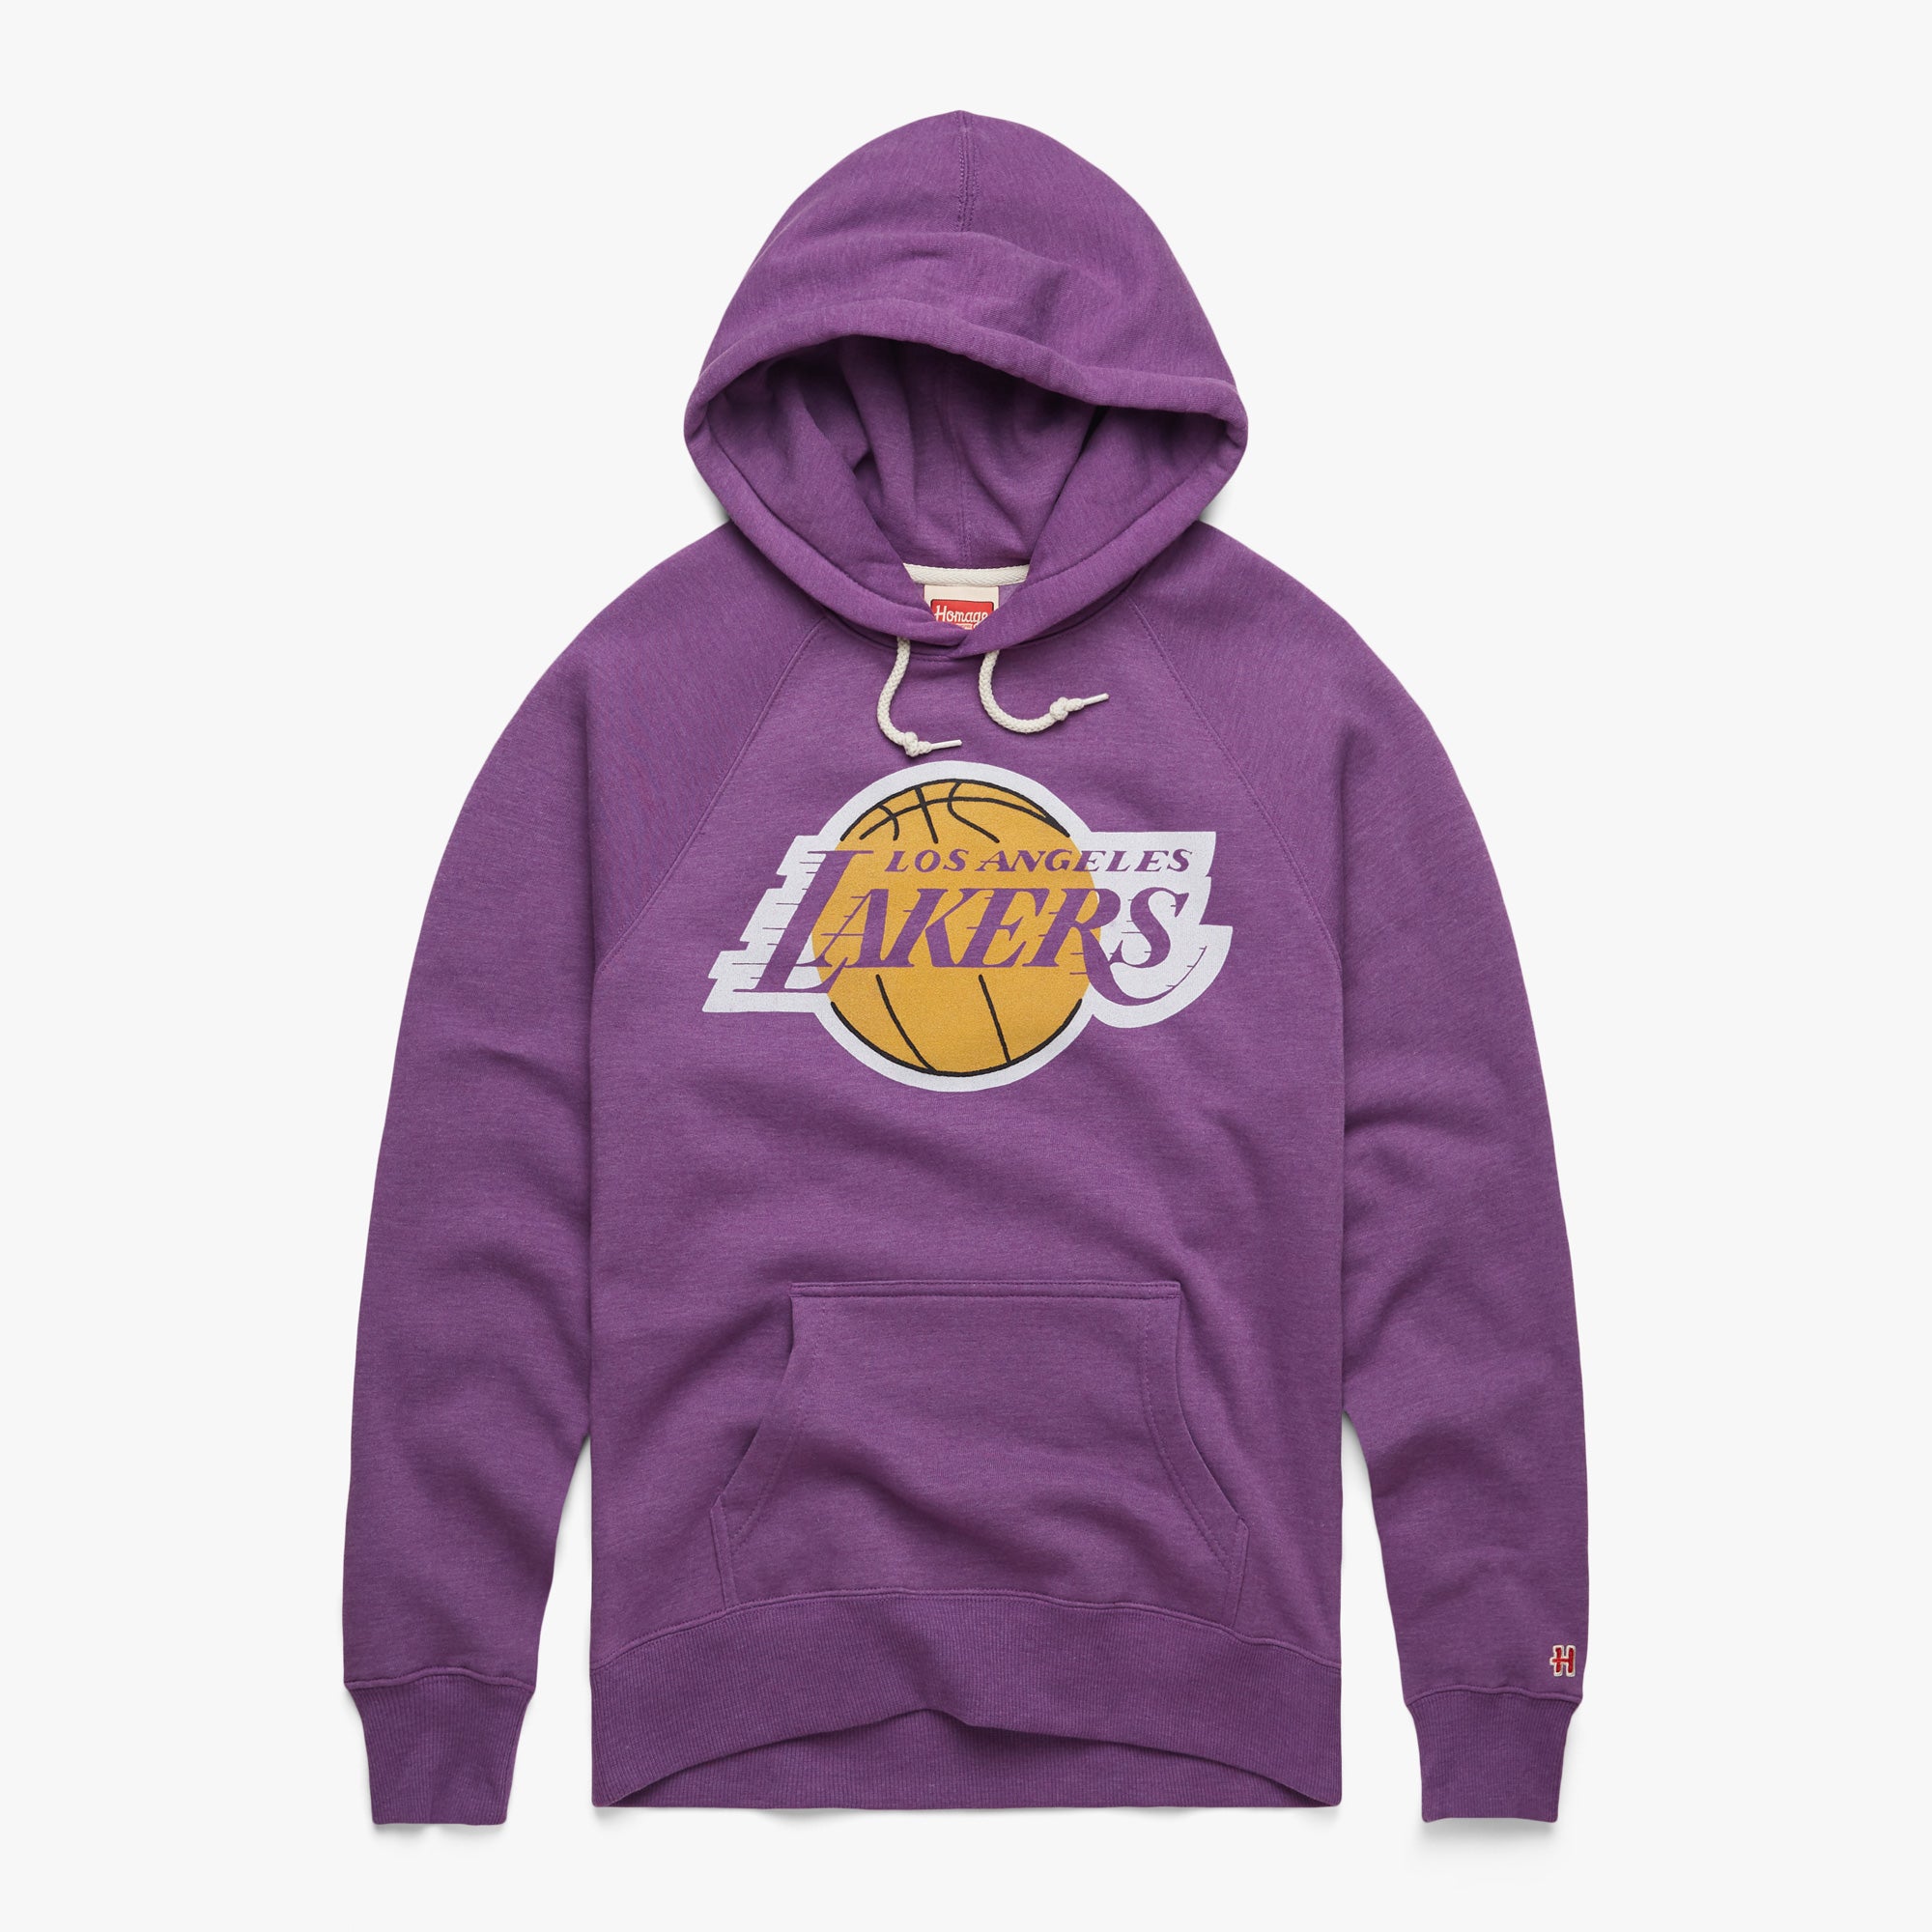 Lakers Sweater 